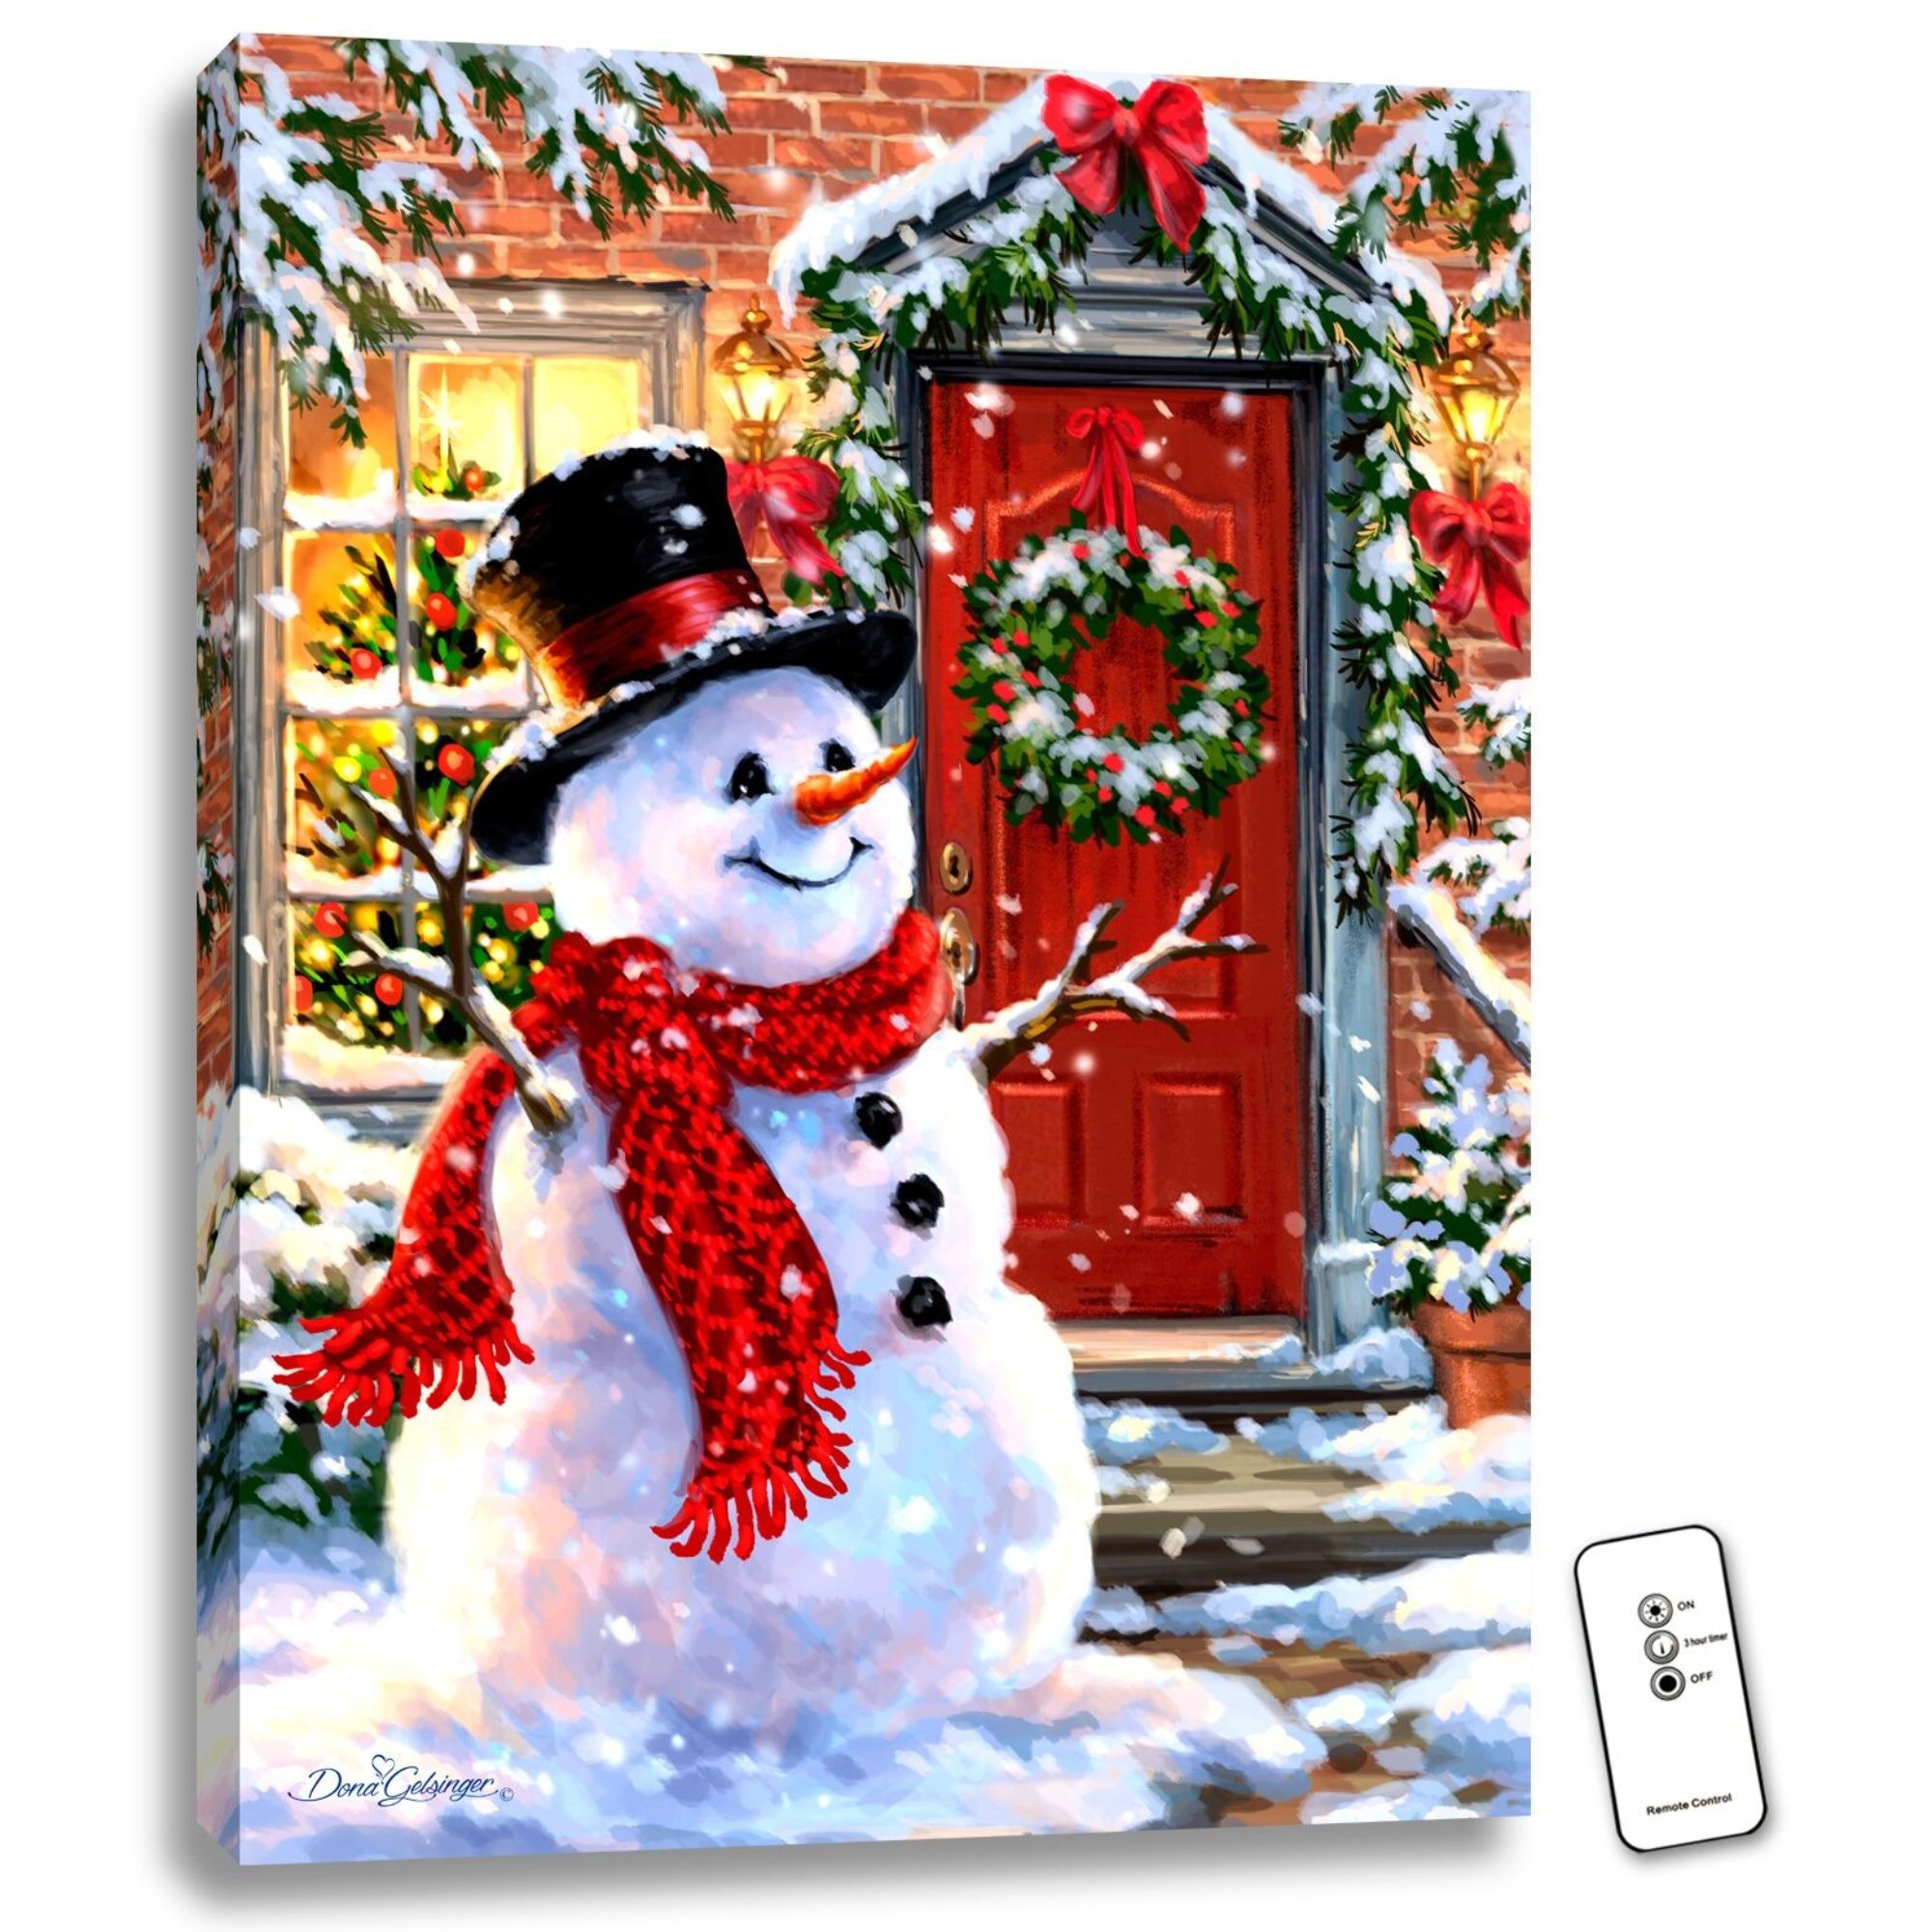 Glow Decor White and Red Snowman LED Backlit Christmas Rectangular Wall Art with Remote Control 24" - image 1 of 1